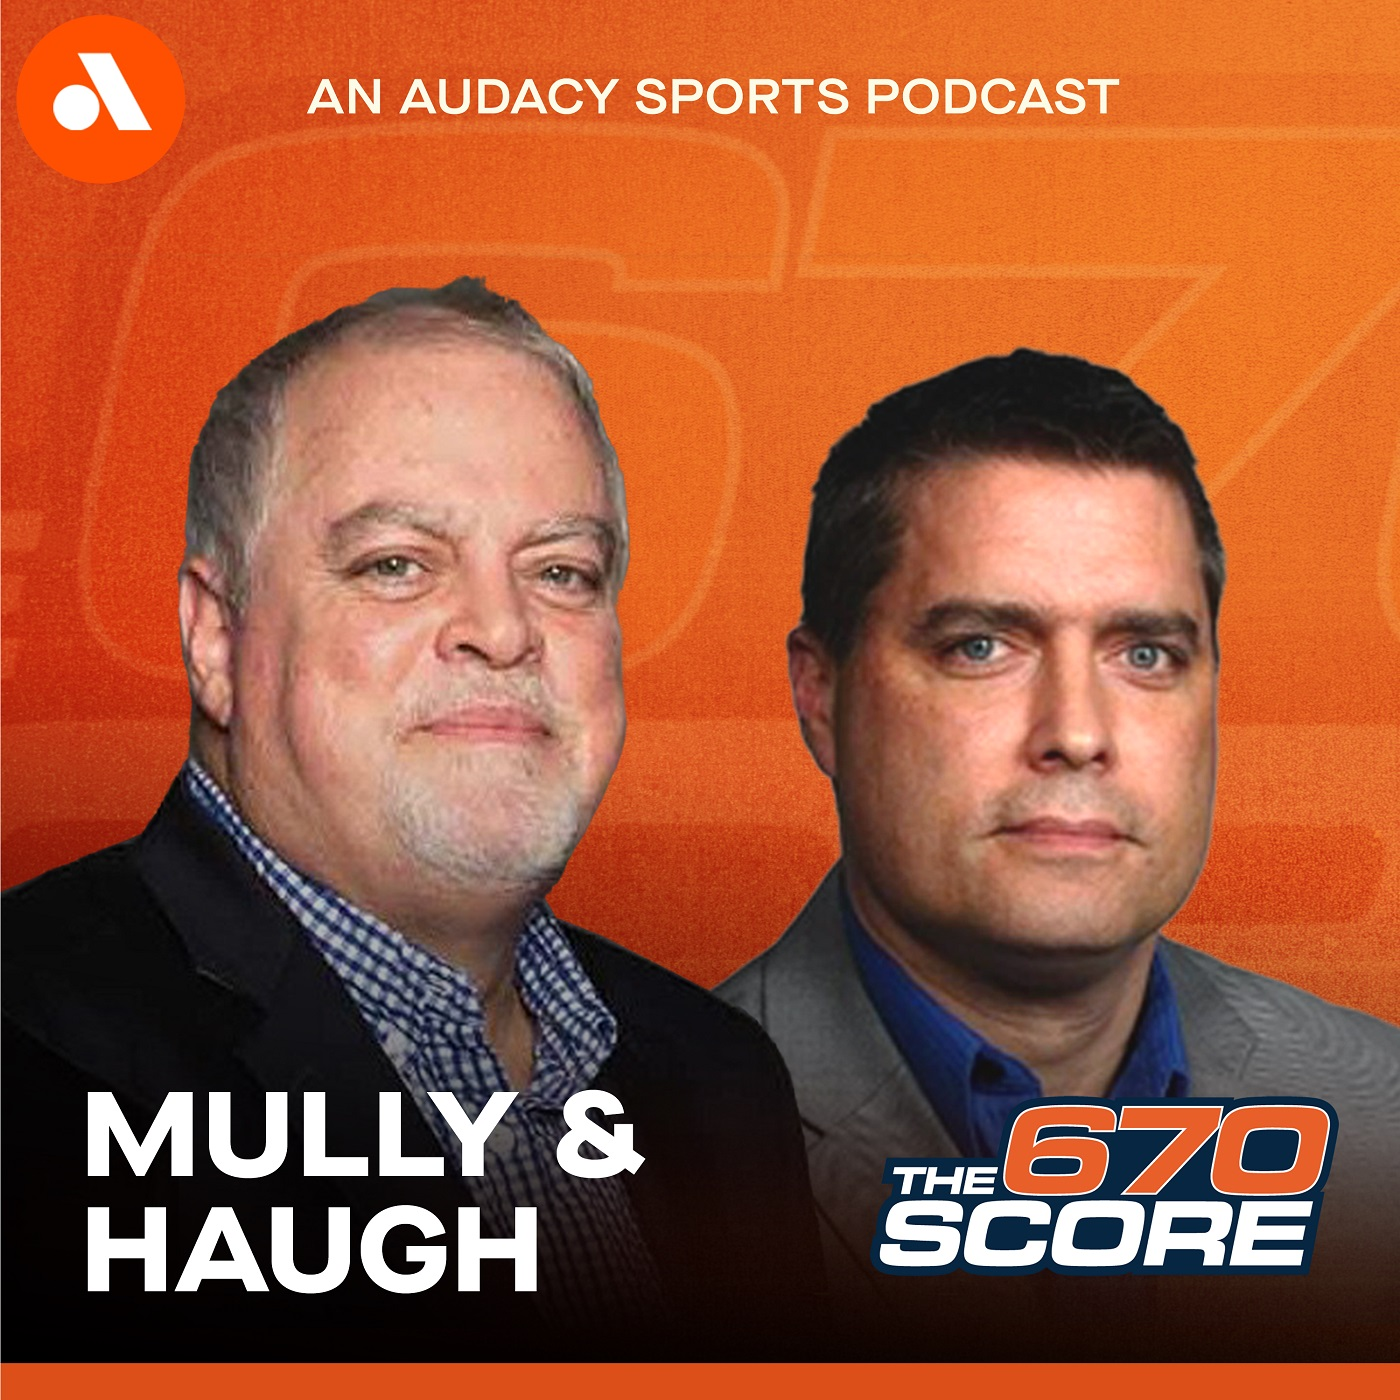 Mully & Haugh: Tommy Hottovy &  Bill Ruthhart interviews (Hour 4)